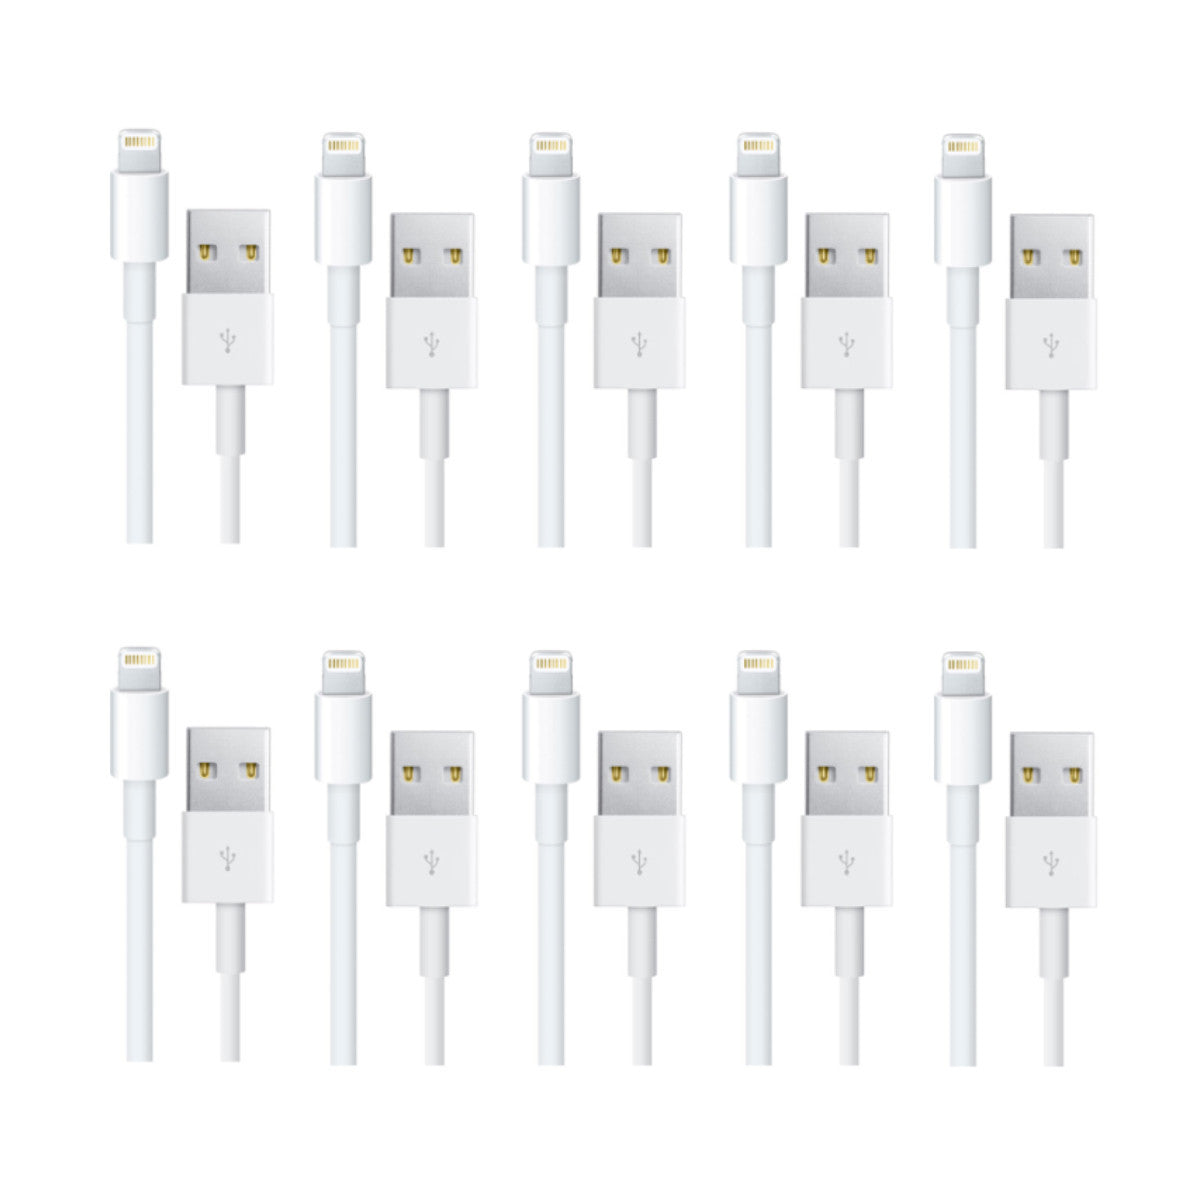 50cm 1m 2m Lightning Cable For Apple iPhone iPad Pro Mini Air iPod 1m (10-Pack)  